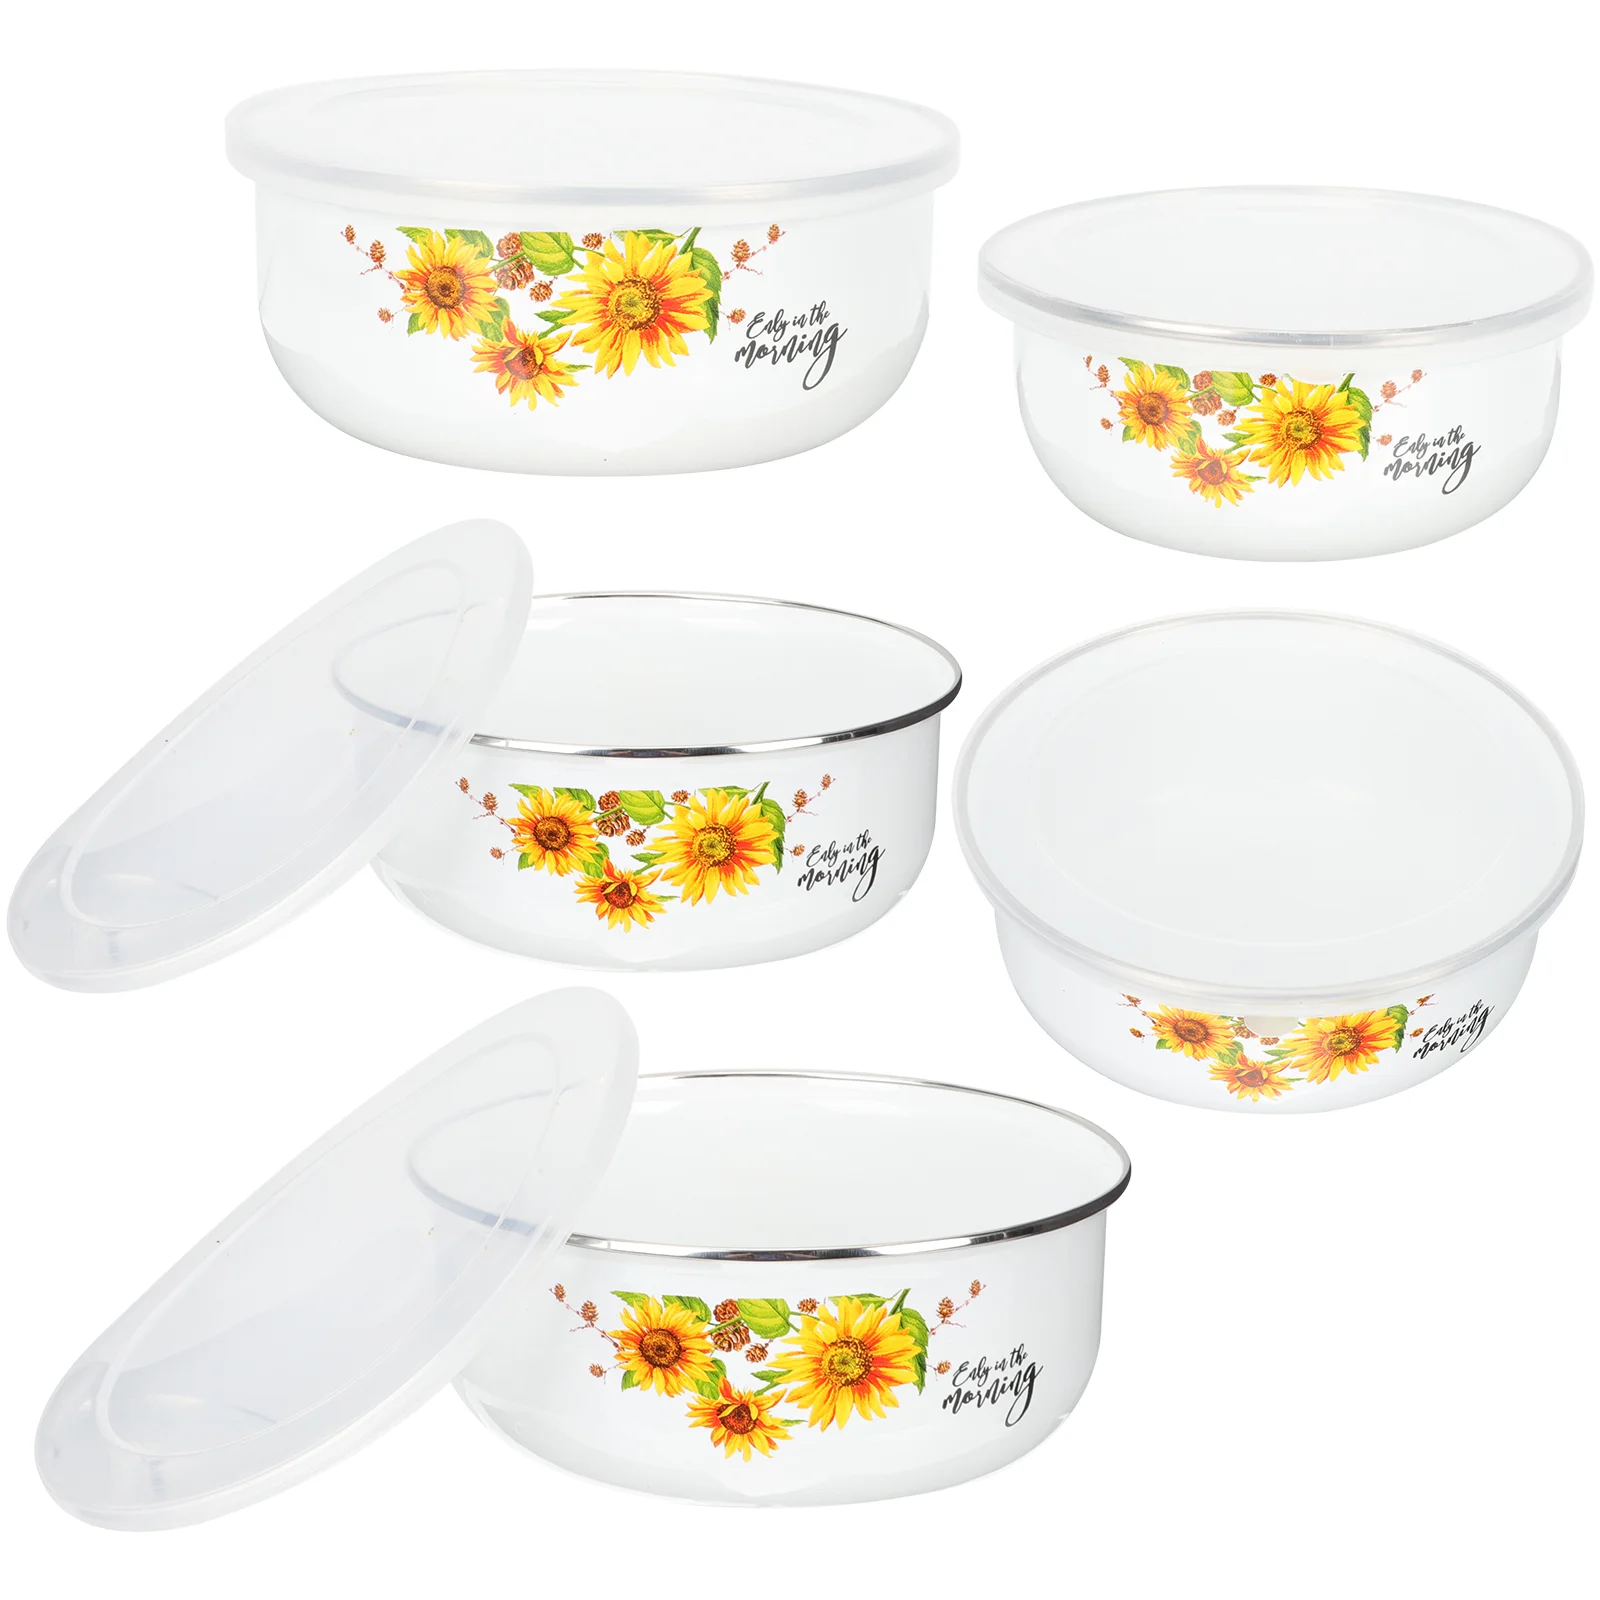 

Bowl Bowls Salad Mixing Enamel Noodle Soup Kitchen Lids Ceramic Instant Lid Basin Camping Container Rice Egg Keeping Fresh Box